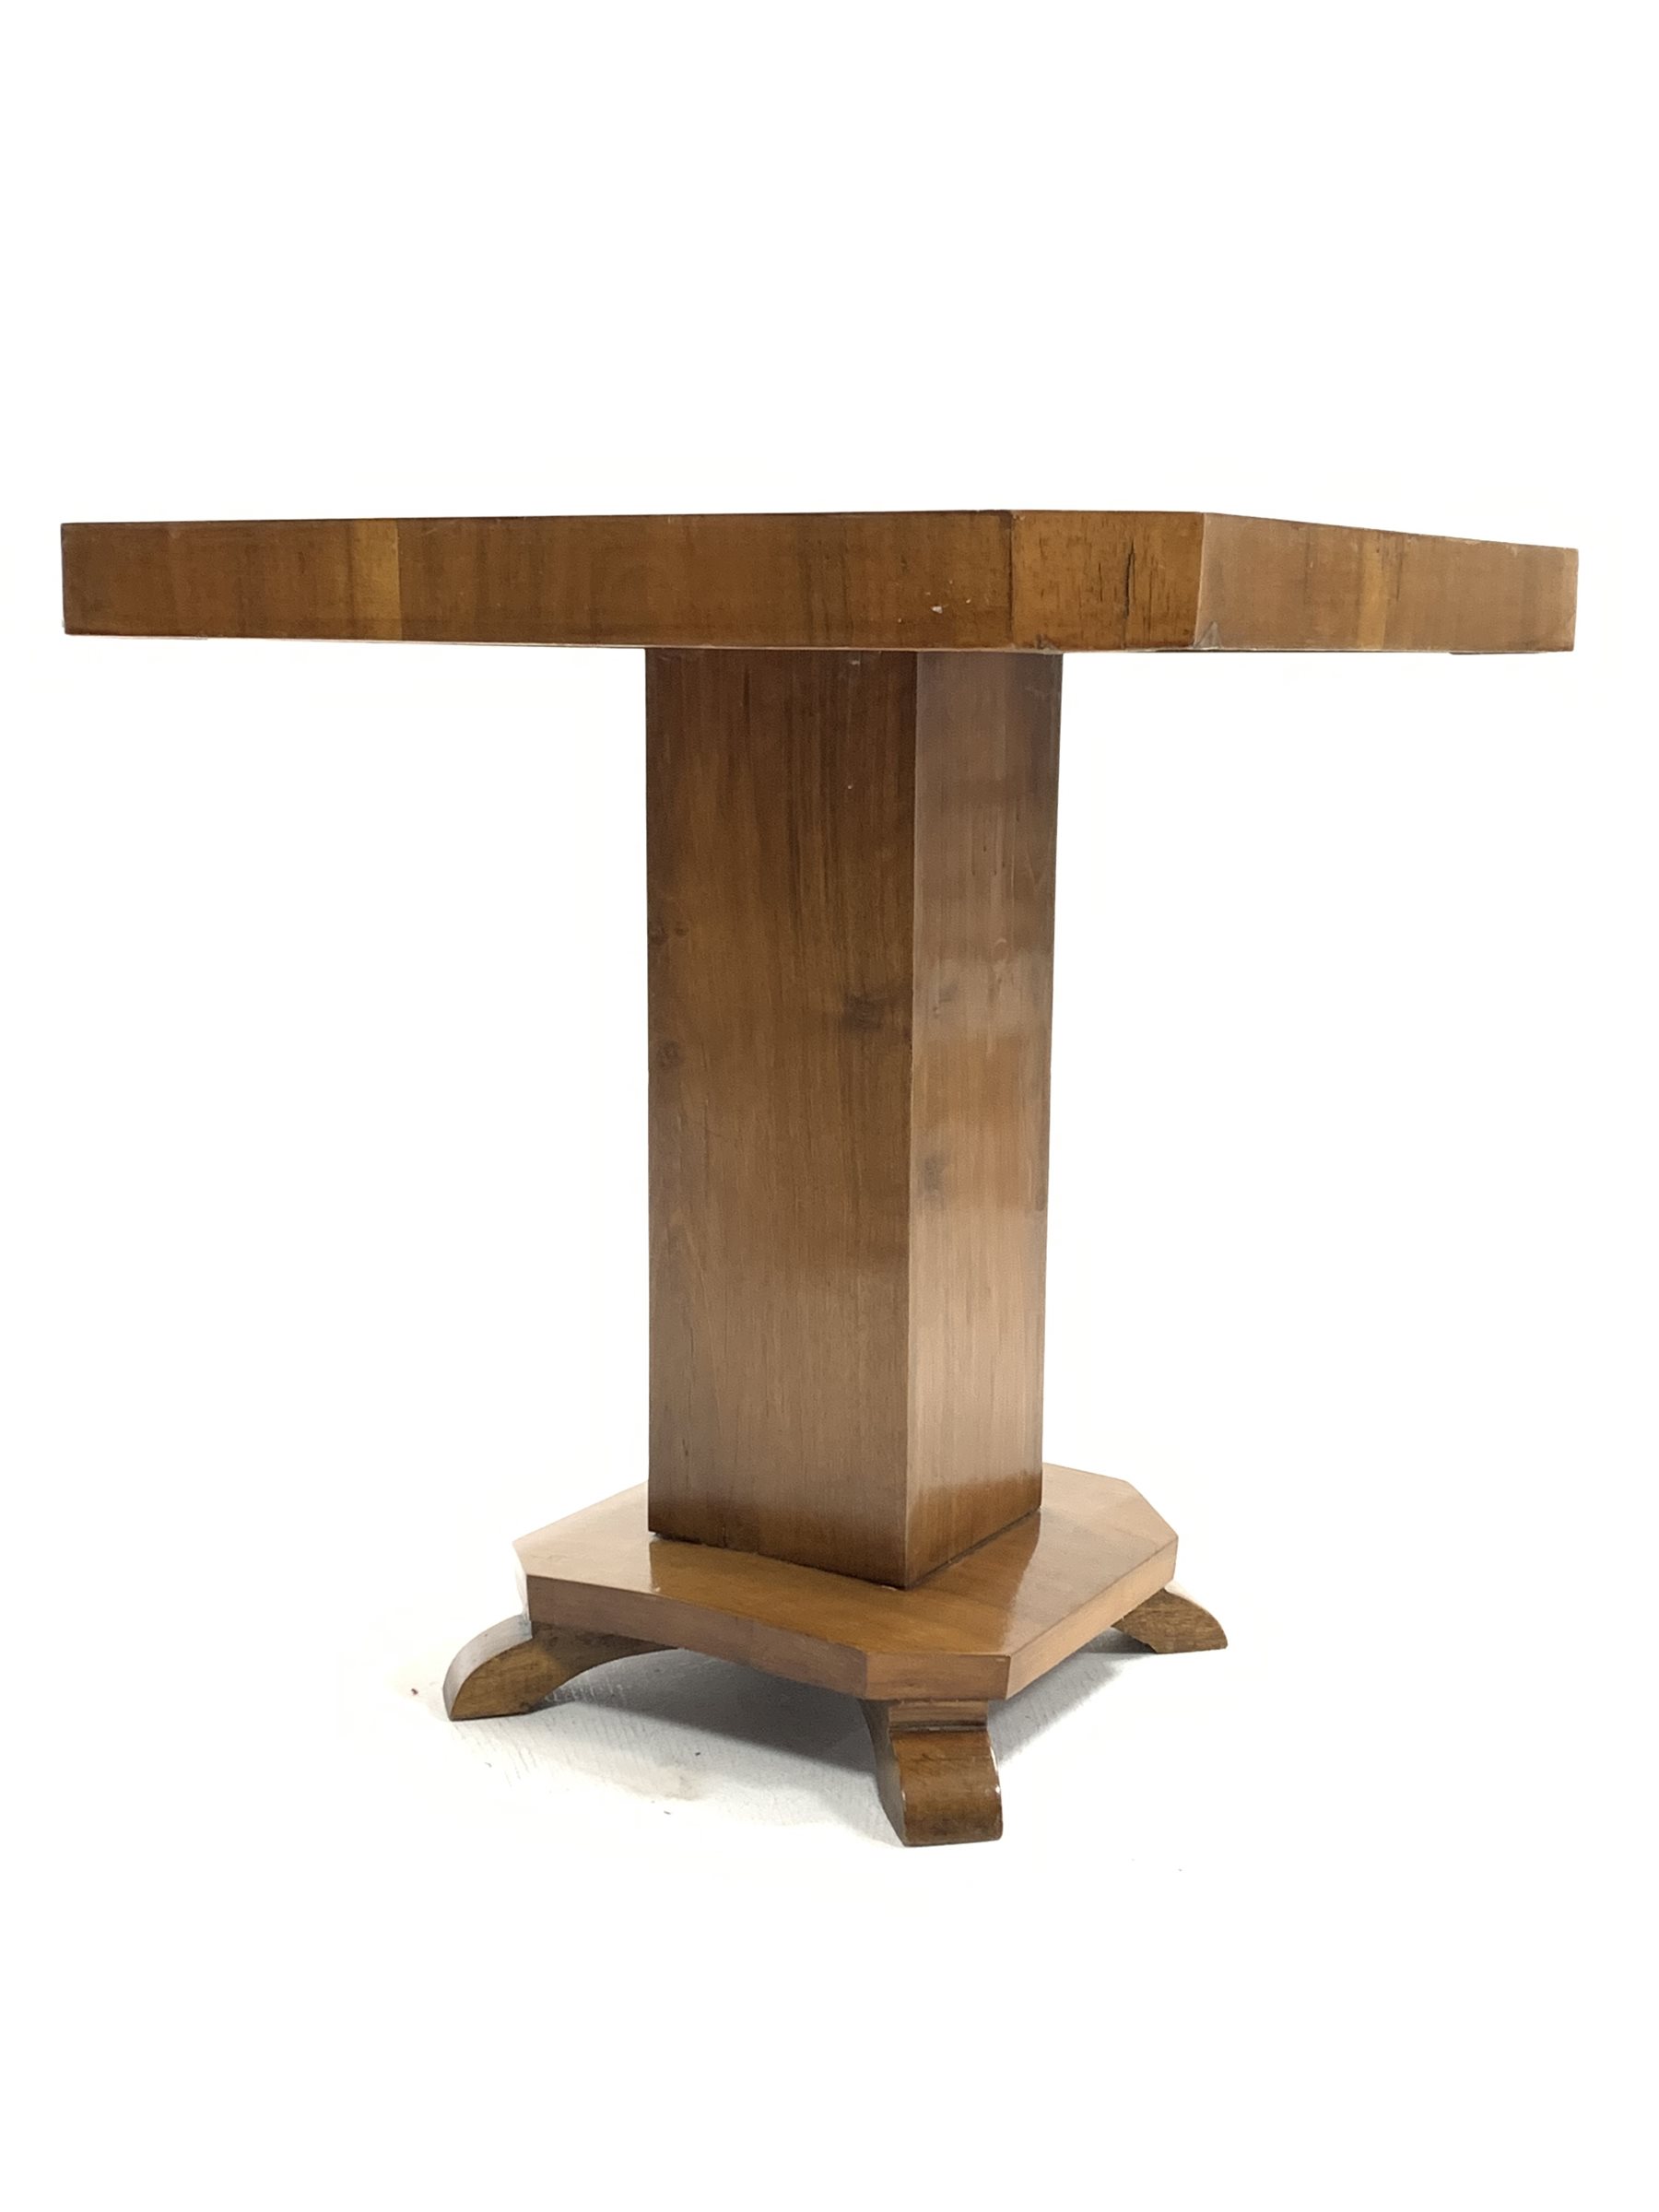 Early 20th century Art Deco walnut lamp table, square top with canted corners raised on square secti - Image 2 of 3